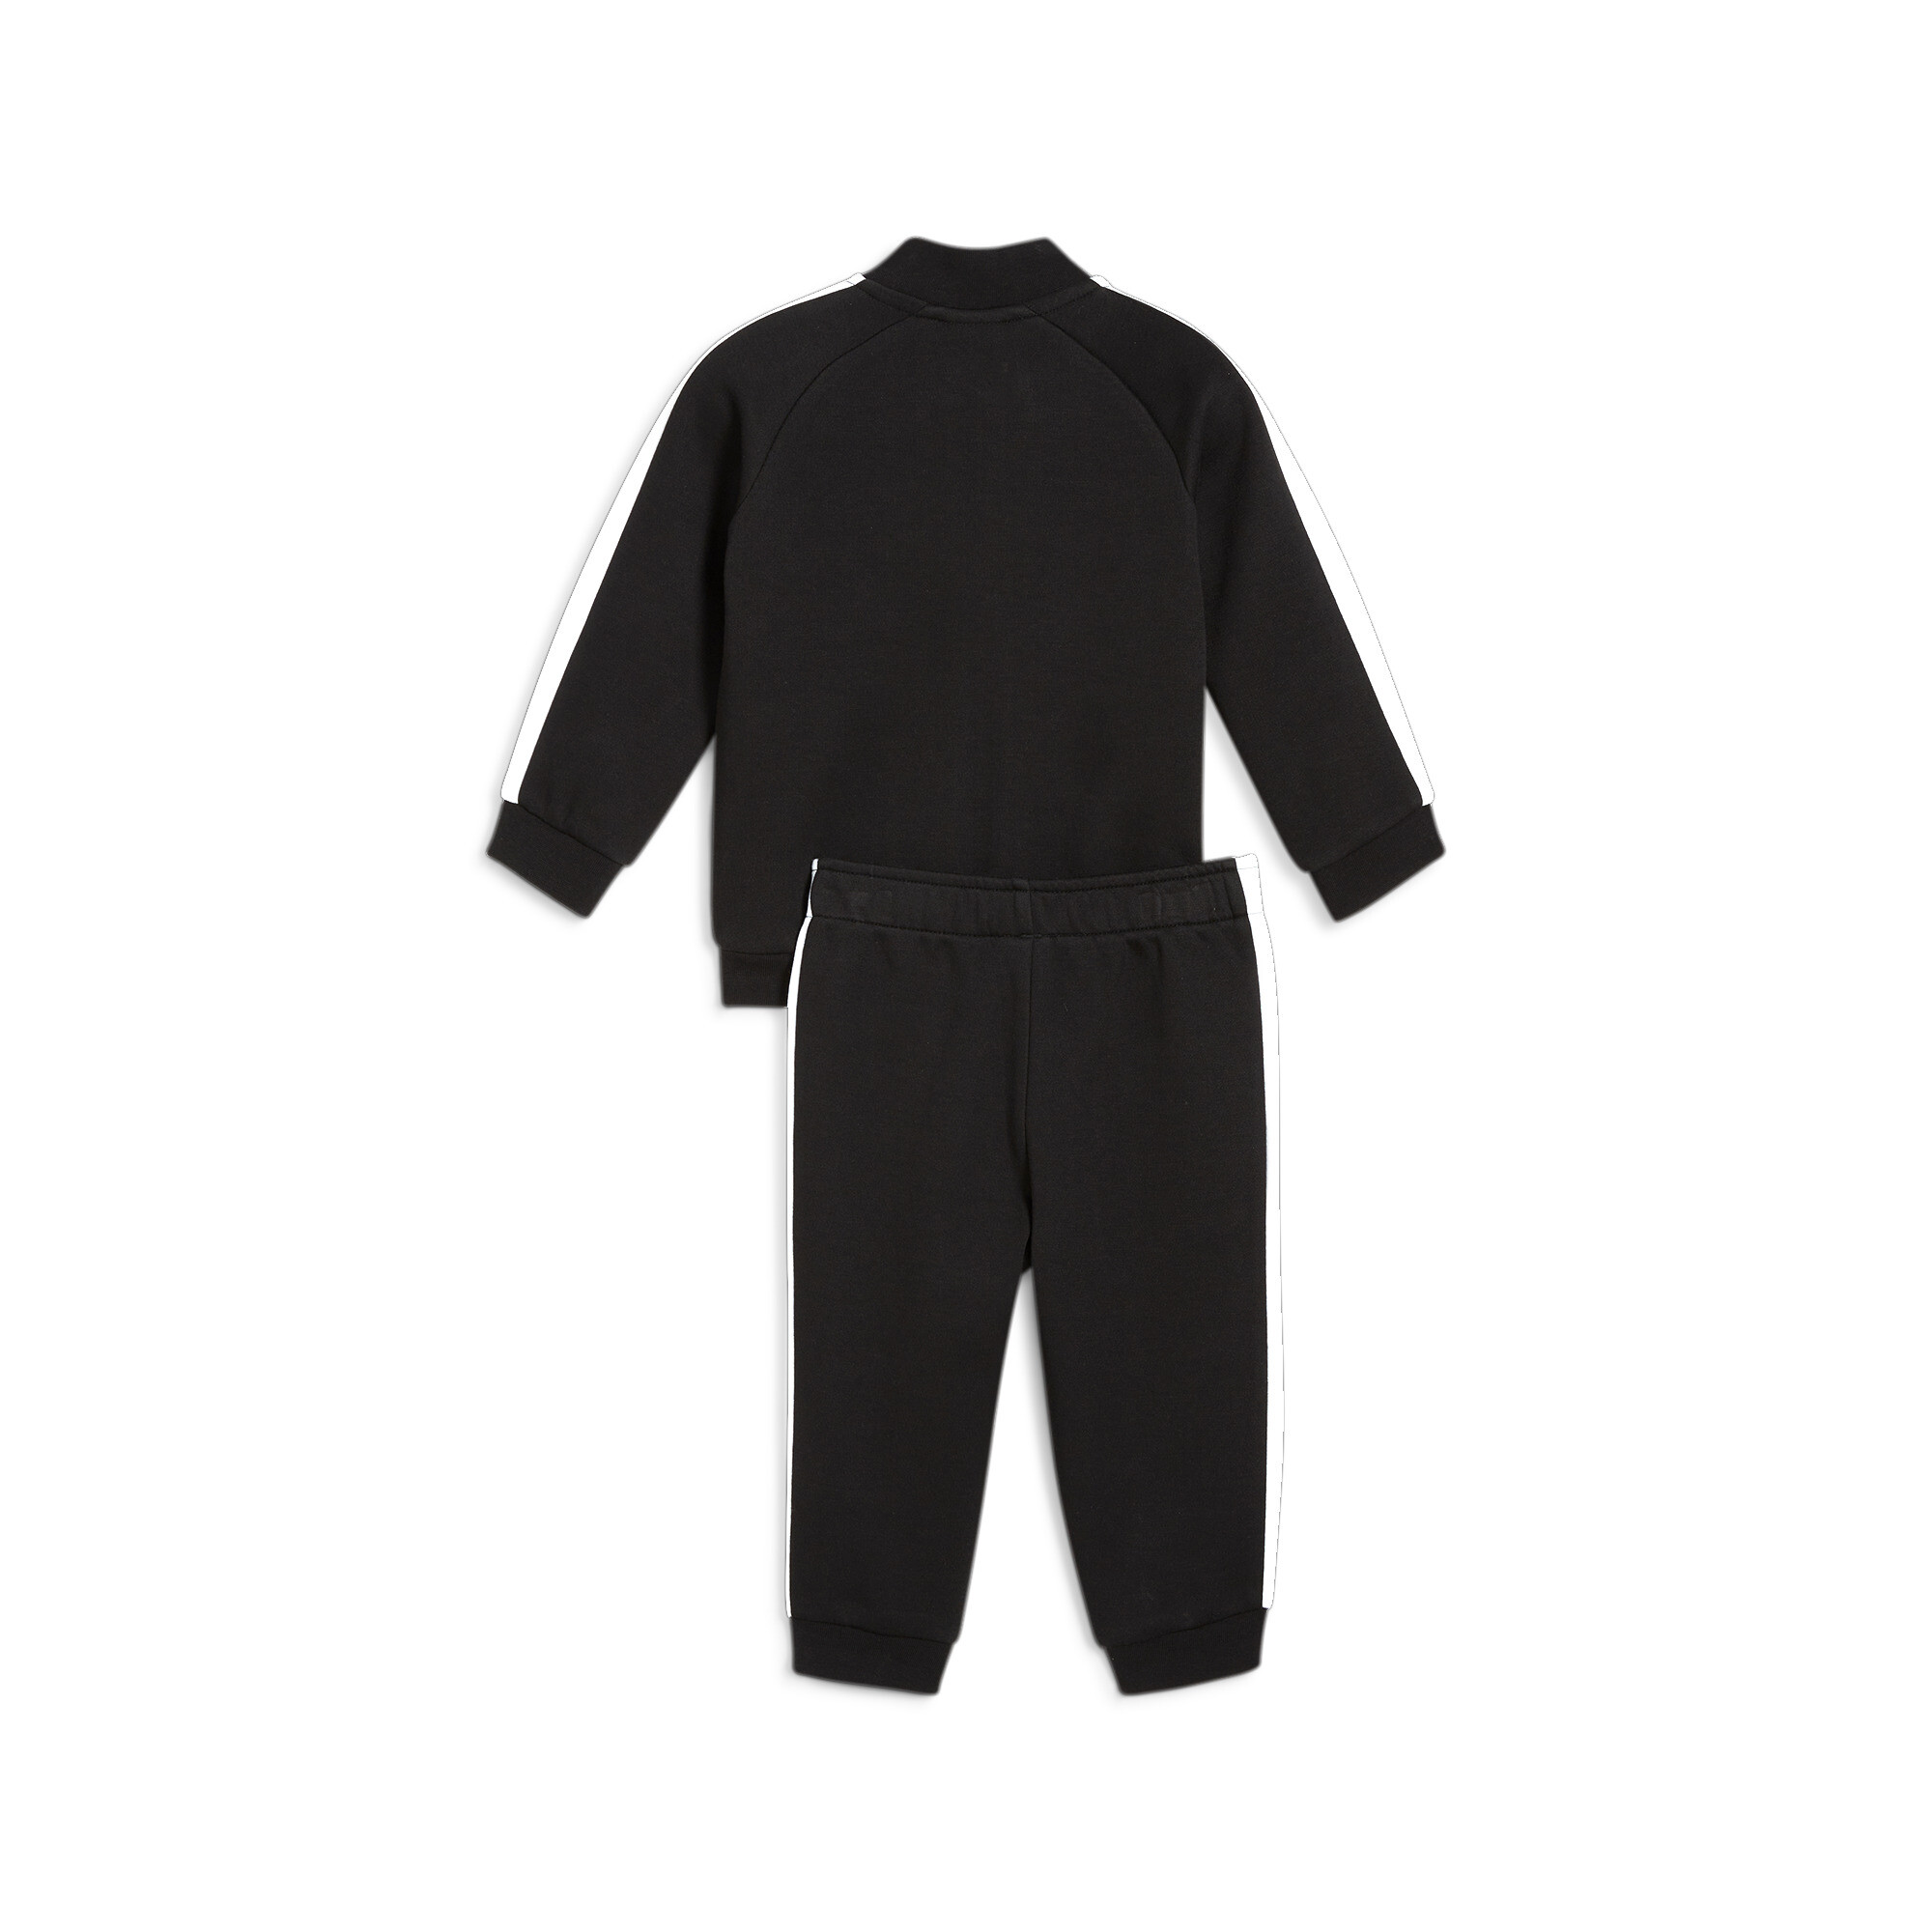 Kids' PUMA MINICATS T7 ICONIC Baby Tracksuit Set In 10 - Black, Size 9-12 Months